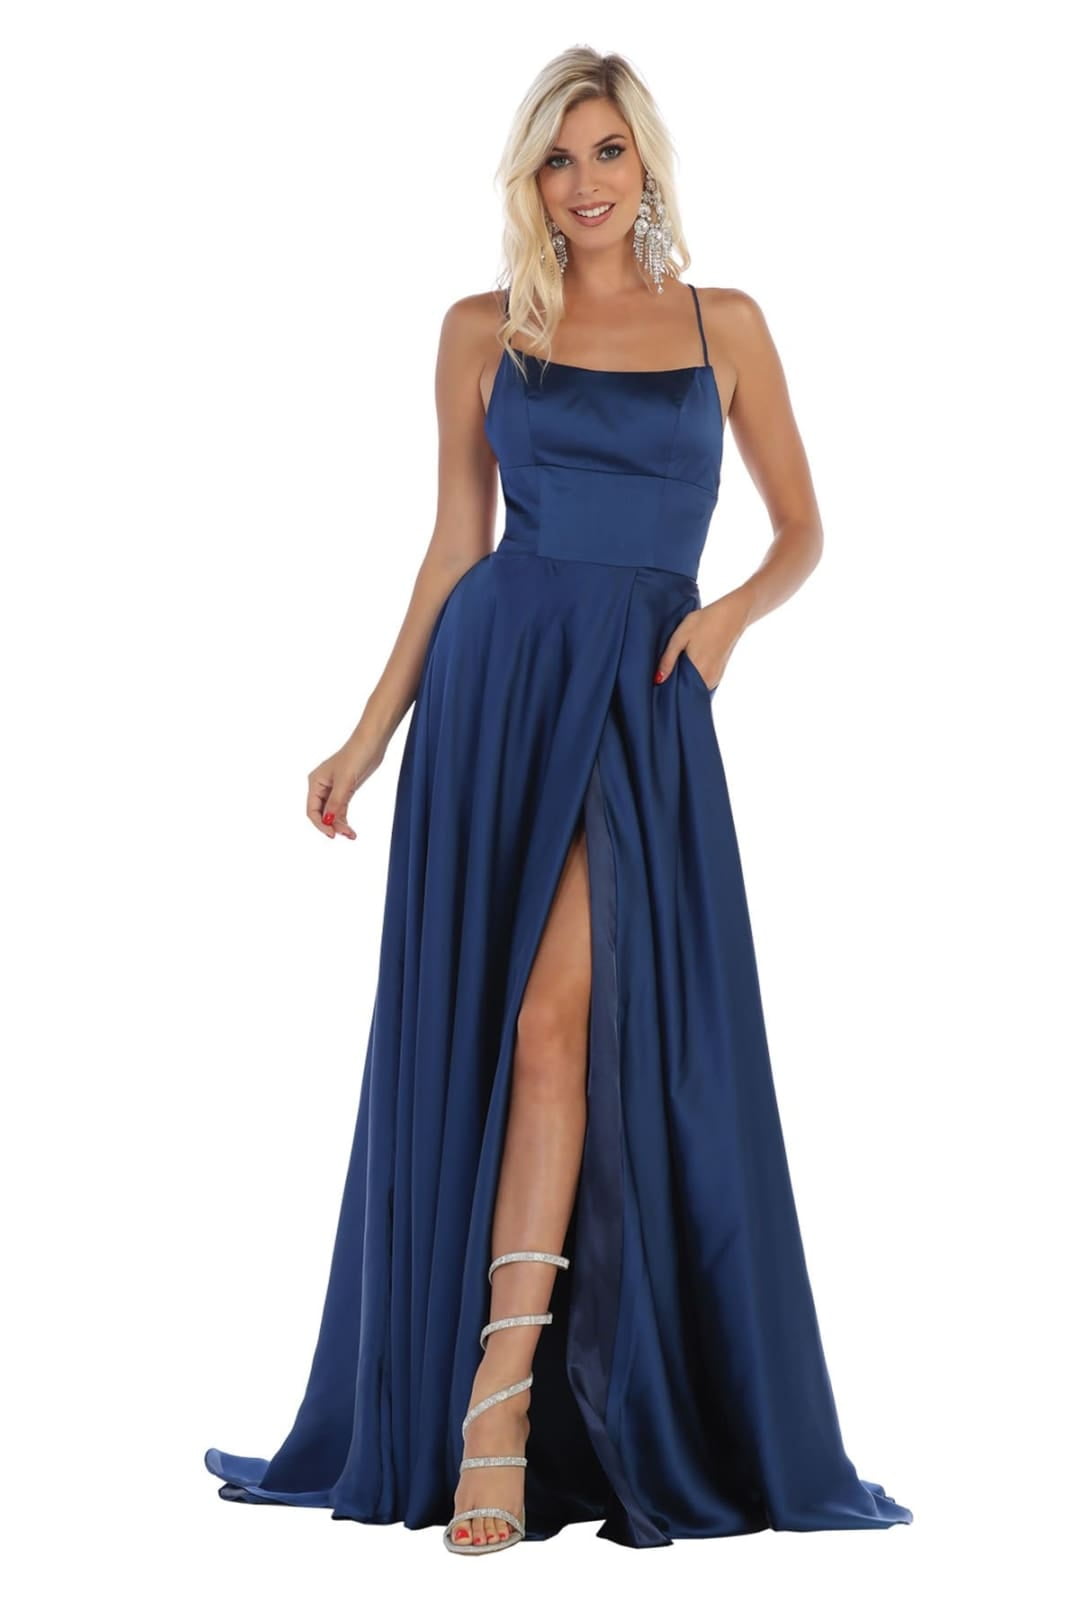 Formal Dresses for Women Evening Party Elegant Multi Color Dress Simple And  Sophisticated Design Suitable For All Occasions - Walmart.com